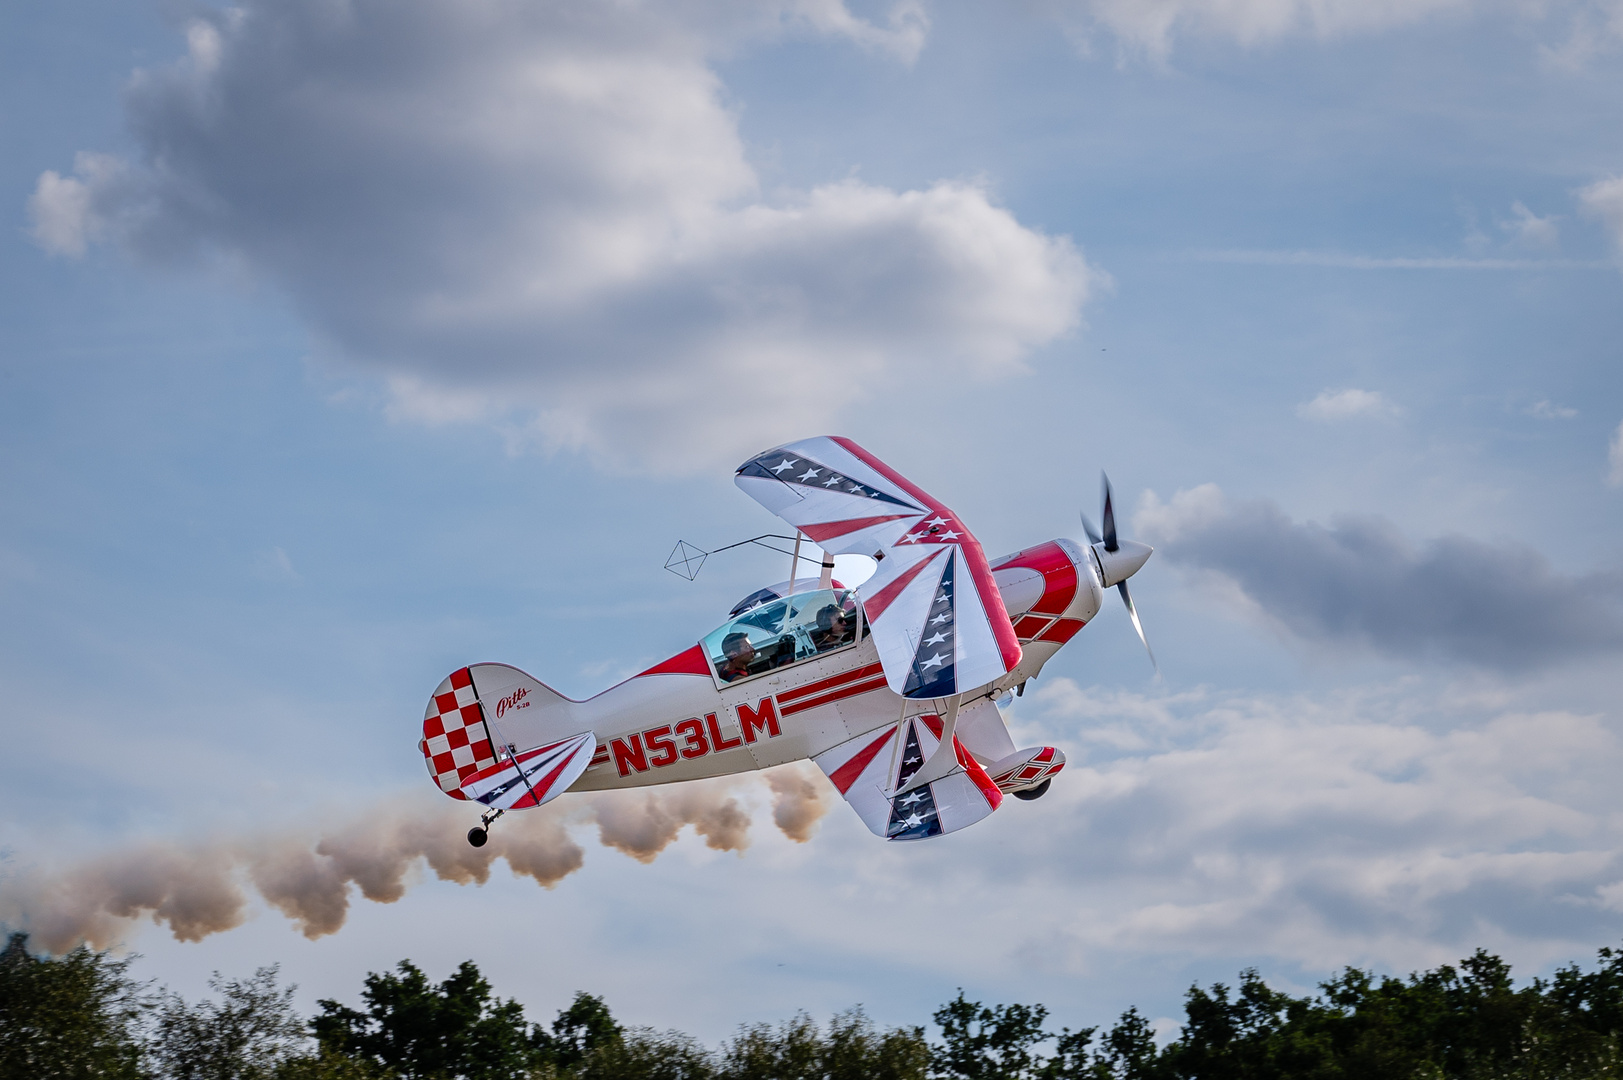 Pitts Special 3